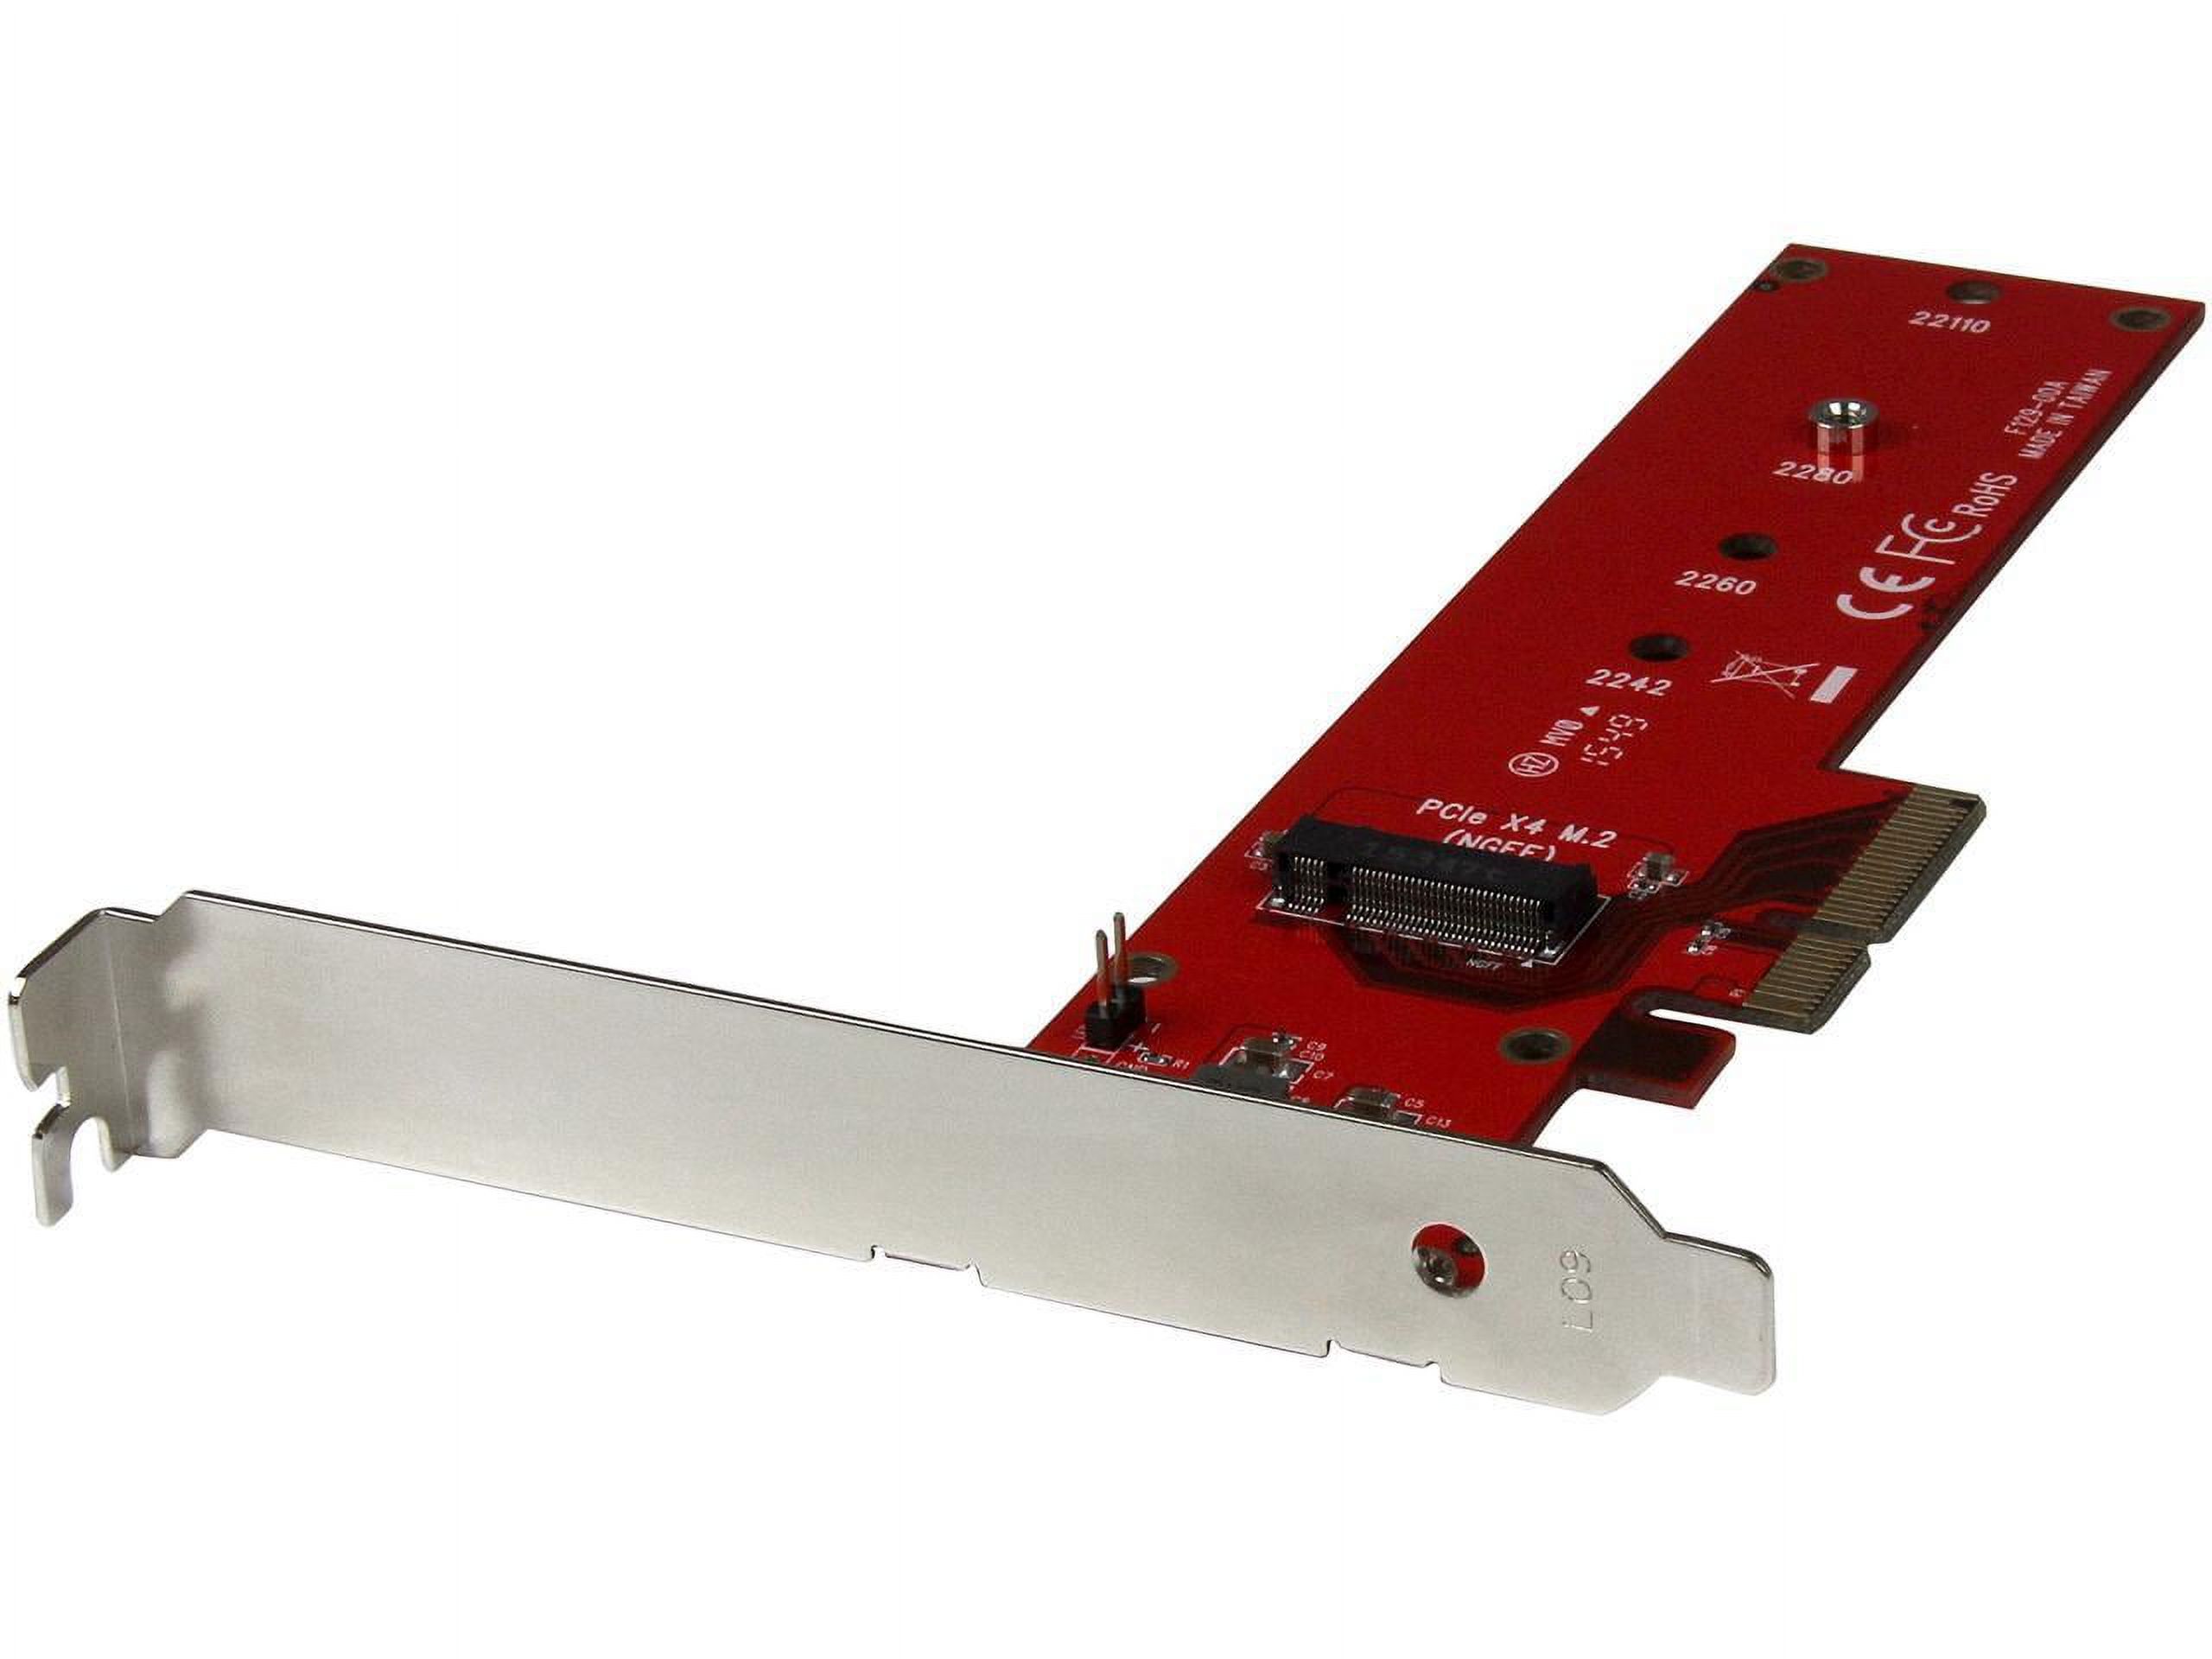 StarTech.com PEX4M2E1 M.2 Adapter - x4 PCIe 3.0 NVMe - Low Profile and Full Profile - SSD PCIE M.2 Adapter - M2 SSD - PCI Express SSD - image 1 of 4